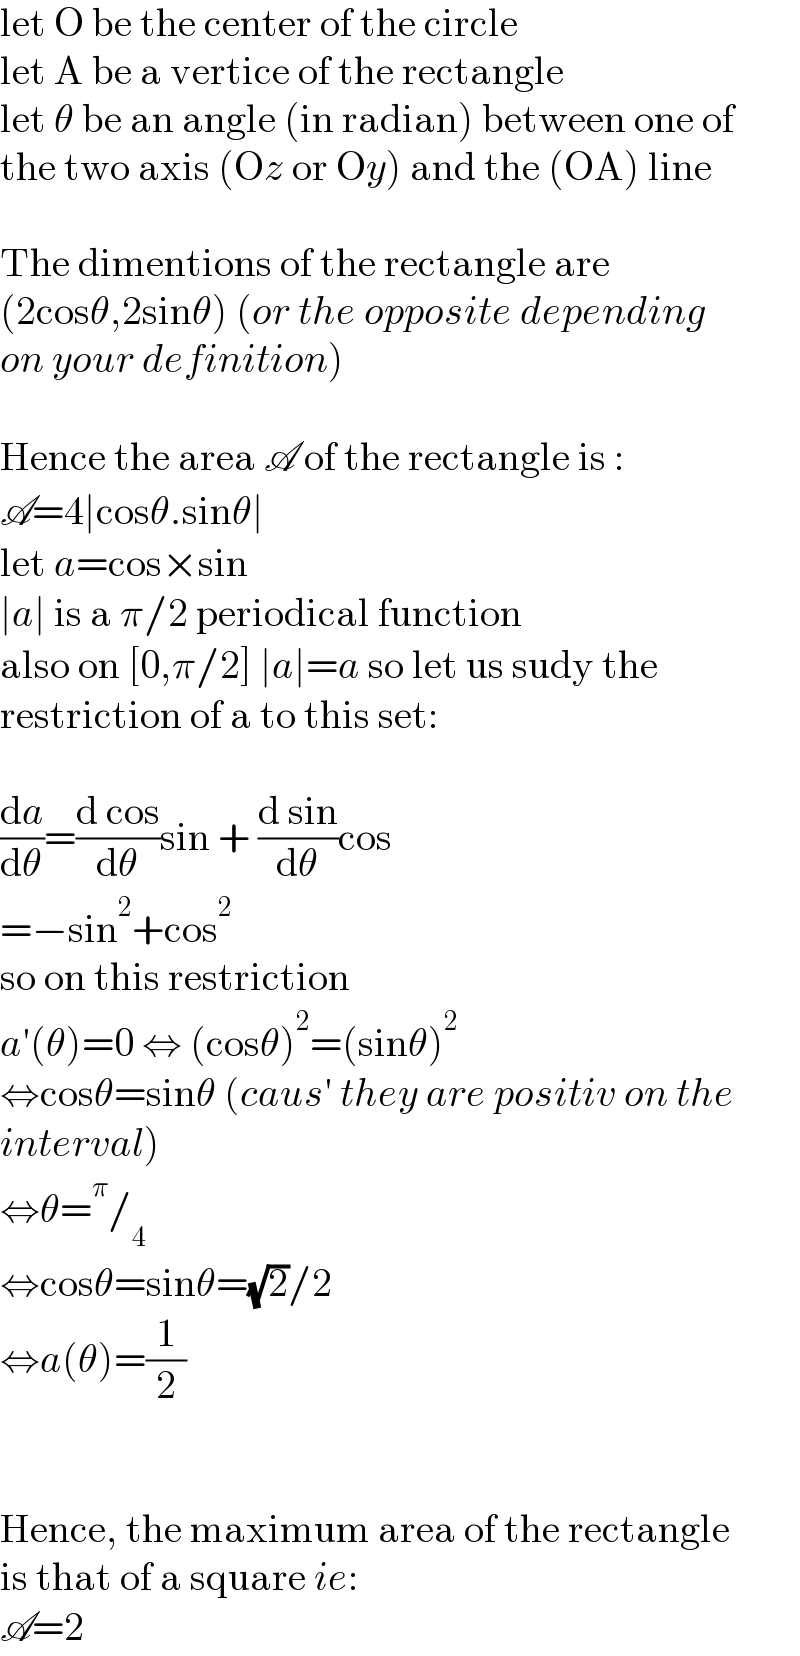 let O be the center of the circle  let A be a vertice of the rectangle  let θ be an angle (in radian) between one of  the two axis (Oz or Oy) and the (OA) line    The dimentions of the rectangle are  (2cosθ,2sinθ) (or the opposite depending  on your definition)    Hence the area A of the rectangle is :  A=4∣cosθ.sinθ∣  let a=cos×sin  ∣a∣ is a π/2 periodical function  also on [0,π/2] ∣a∣=a so let us sudy the  restriction of a to this set:    (da/dθ)=((d cos)/dθ)sin + ((d sin)/dθ)cos  =−sin^2 +cos^2   so on this restriction  a′(θ)=0 ⇔ (cosθ)^2 =(sinθ)^2   ⇔cosθ=sinθ (caus′ they are positiv on the   interval)  ⇔θ=^π /_4   ⇔cosθ=sinθ=(√2)/2  ⇔a(θ)=(1/2)      Hence, the maximum area of the rectangle  is that of a square ie:  A=2  